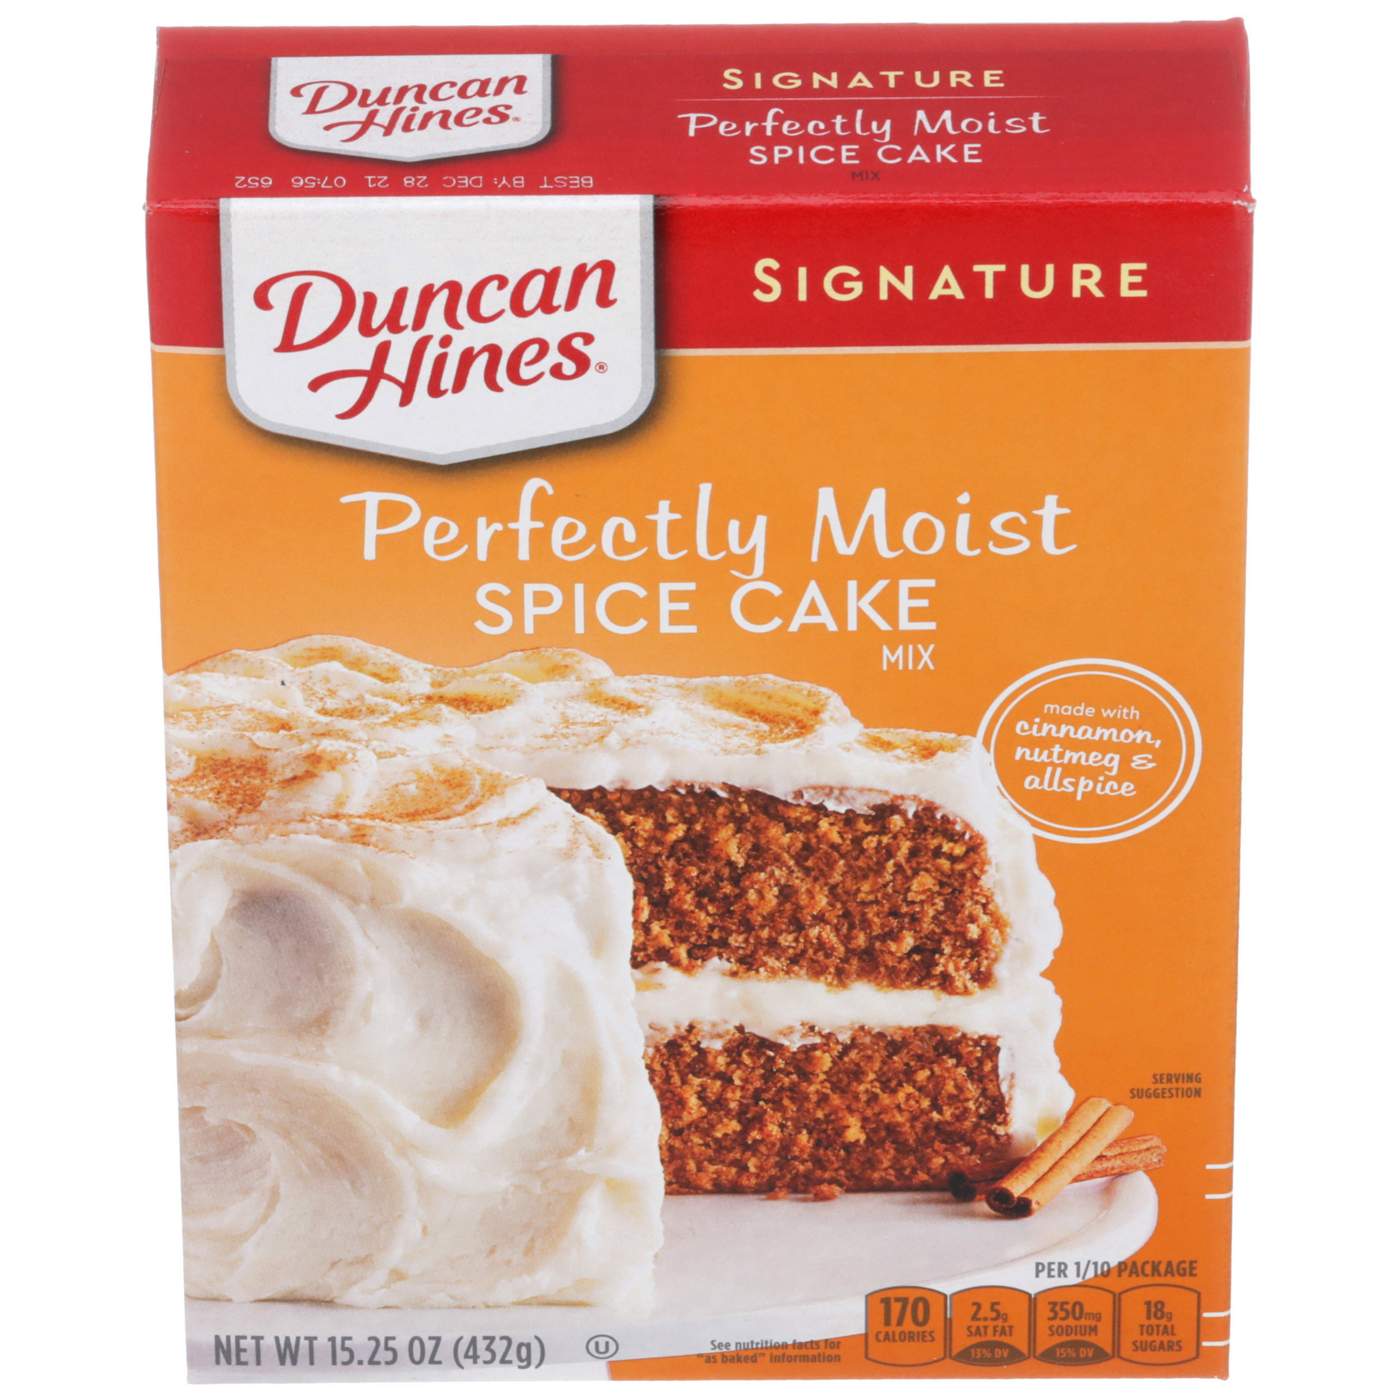 Duncan Hines Signature Perfectly Moist Spice Cake Mix; image 1 of 7